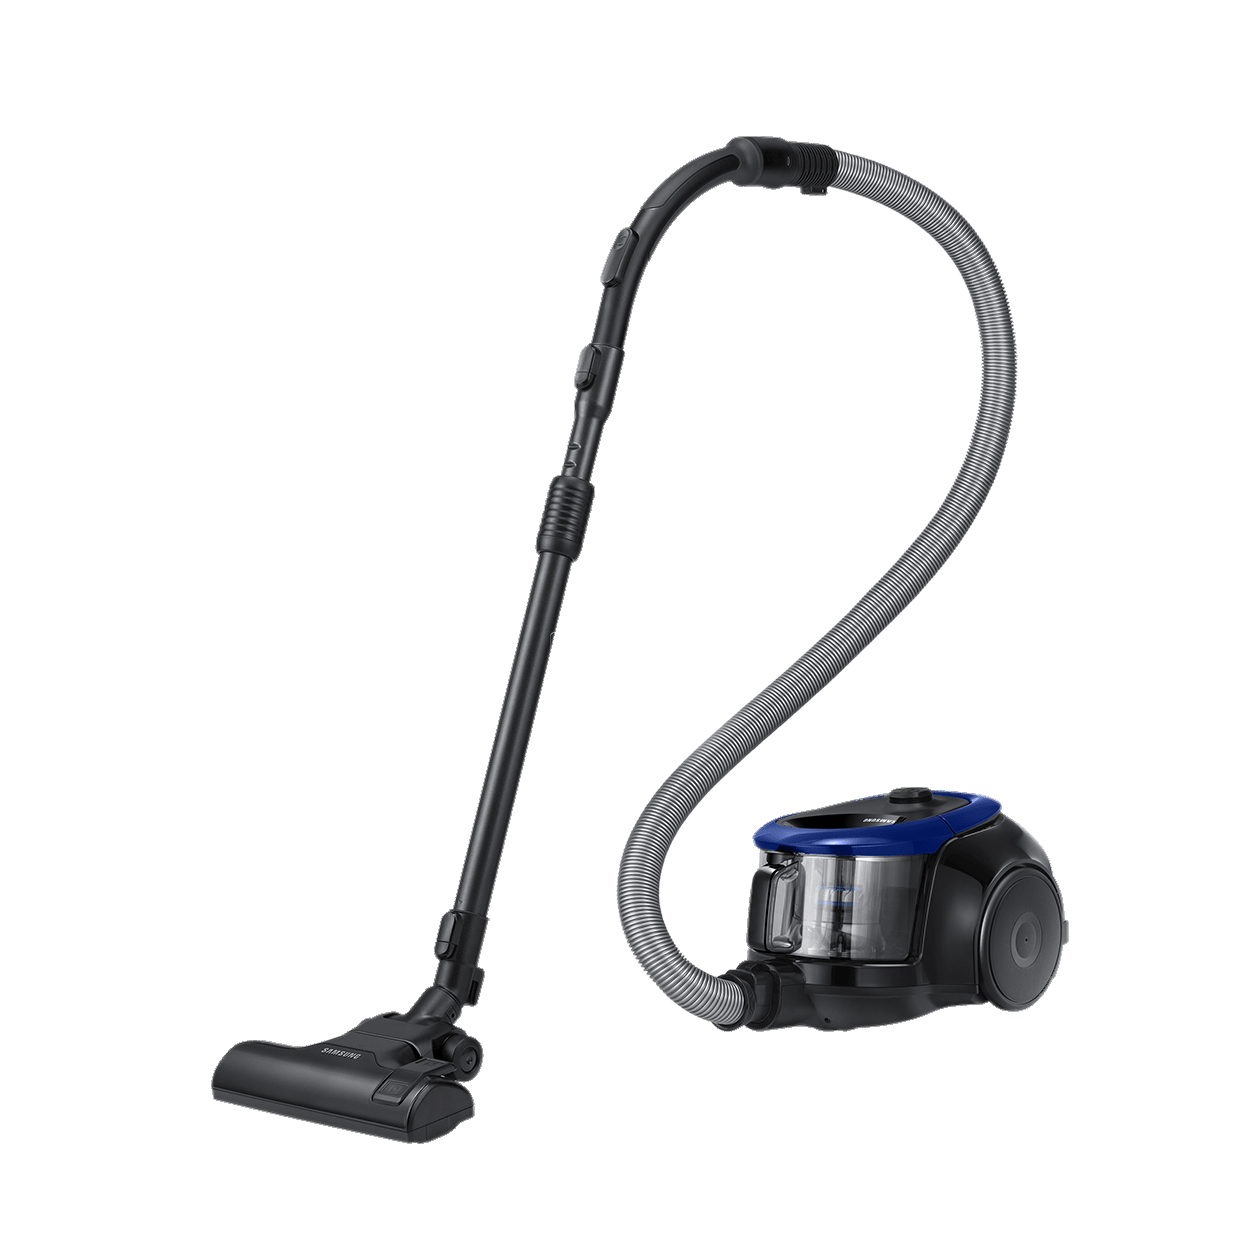 Vacuum Cleaner Png Picture 60209 1056x658 Pixel